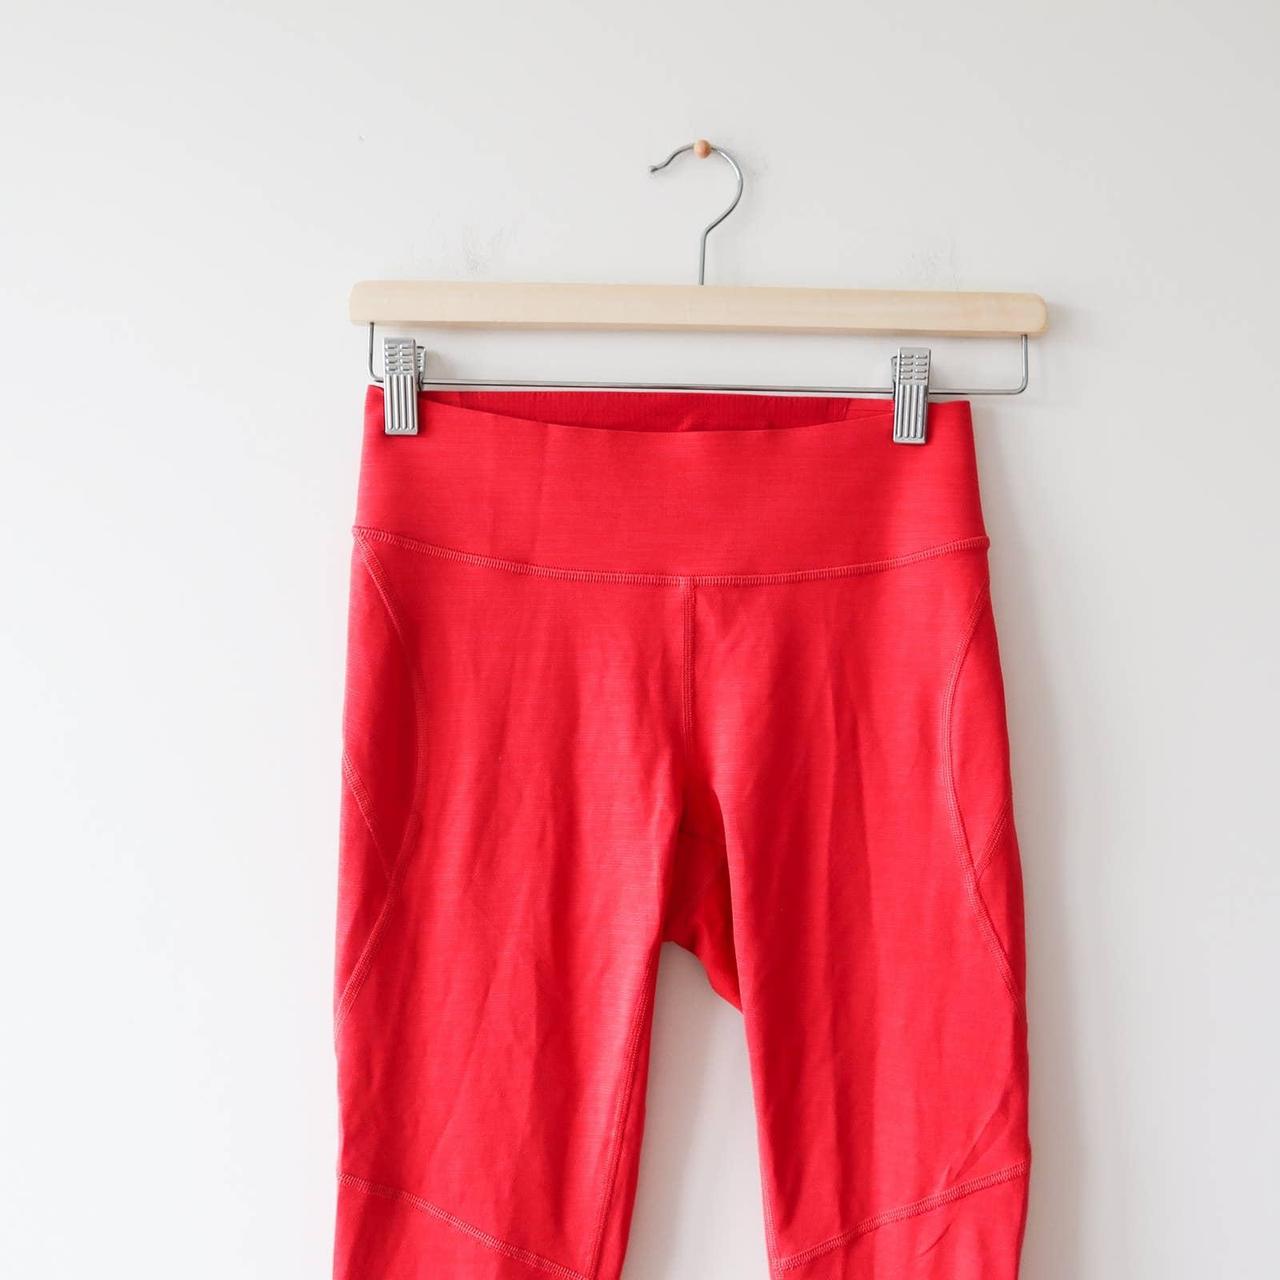 Outdoor Voices Leggings Red High Rise Core TechSweat - Depop